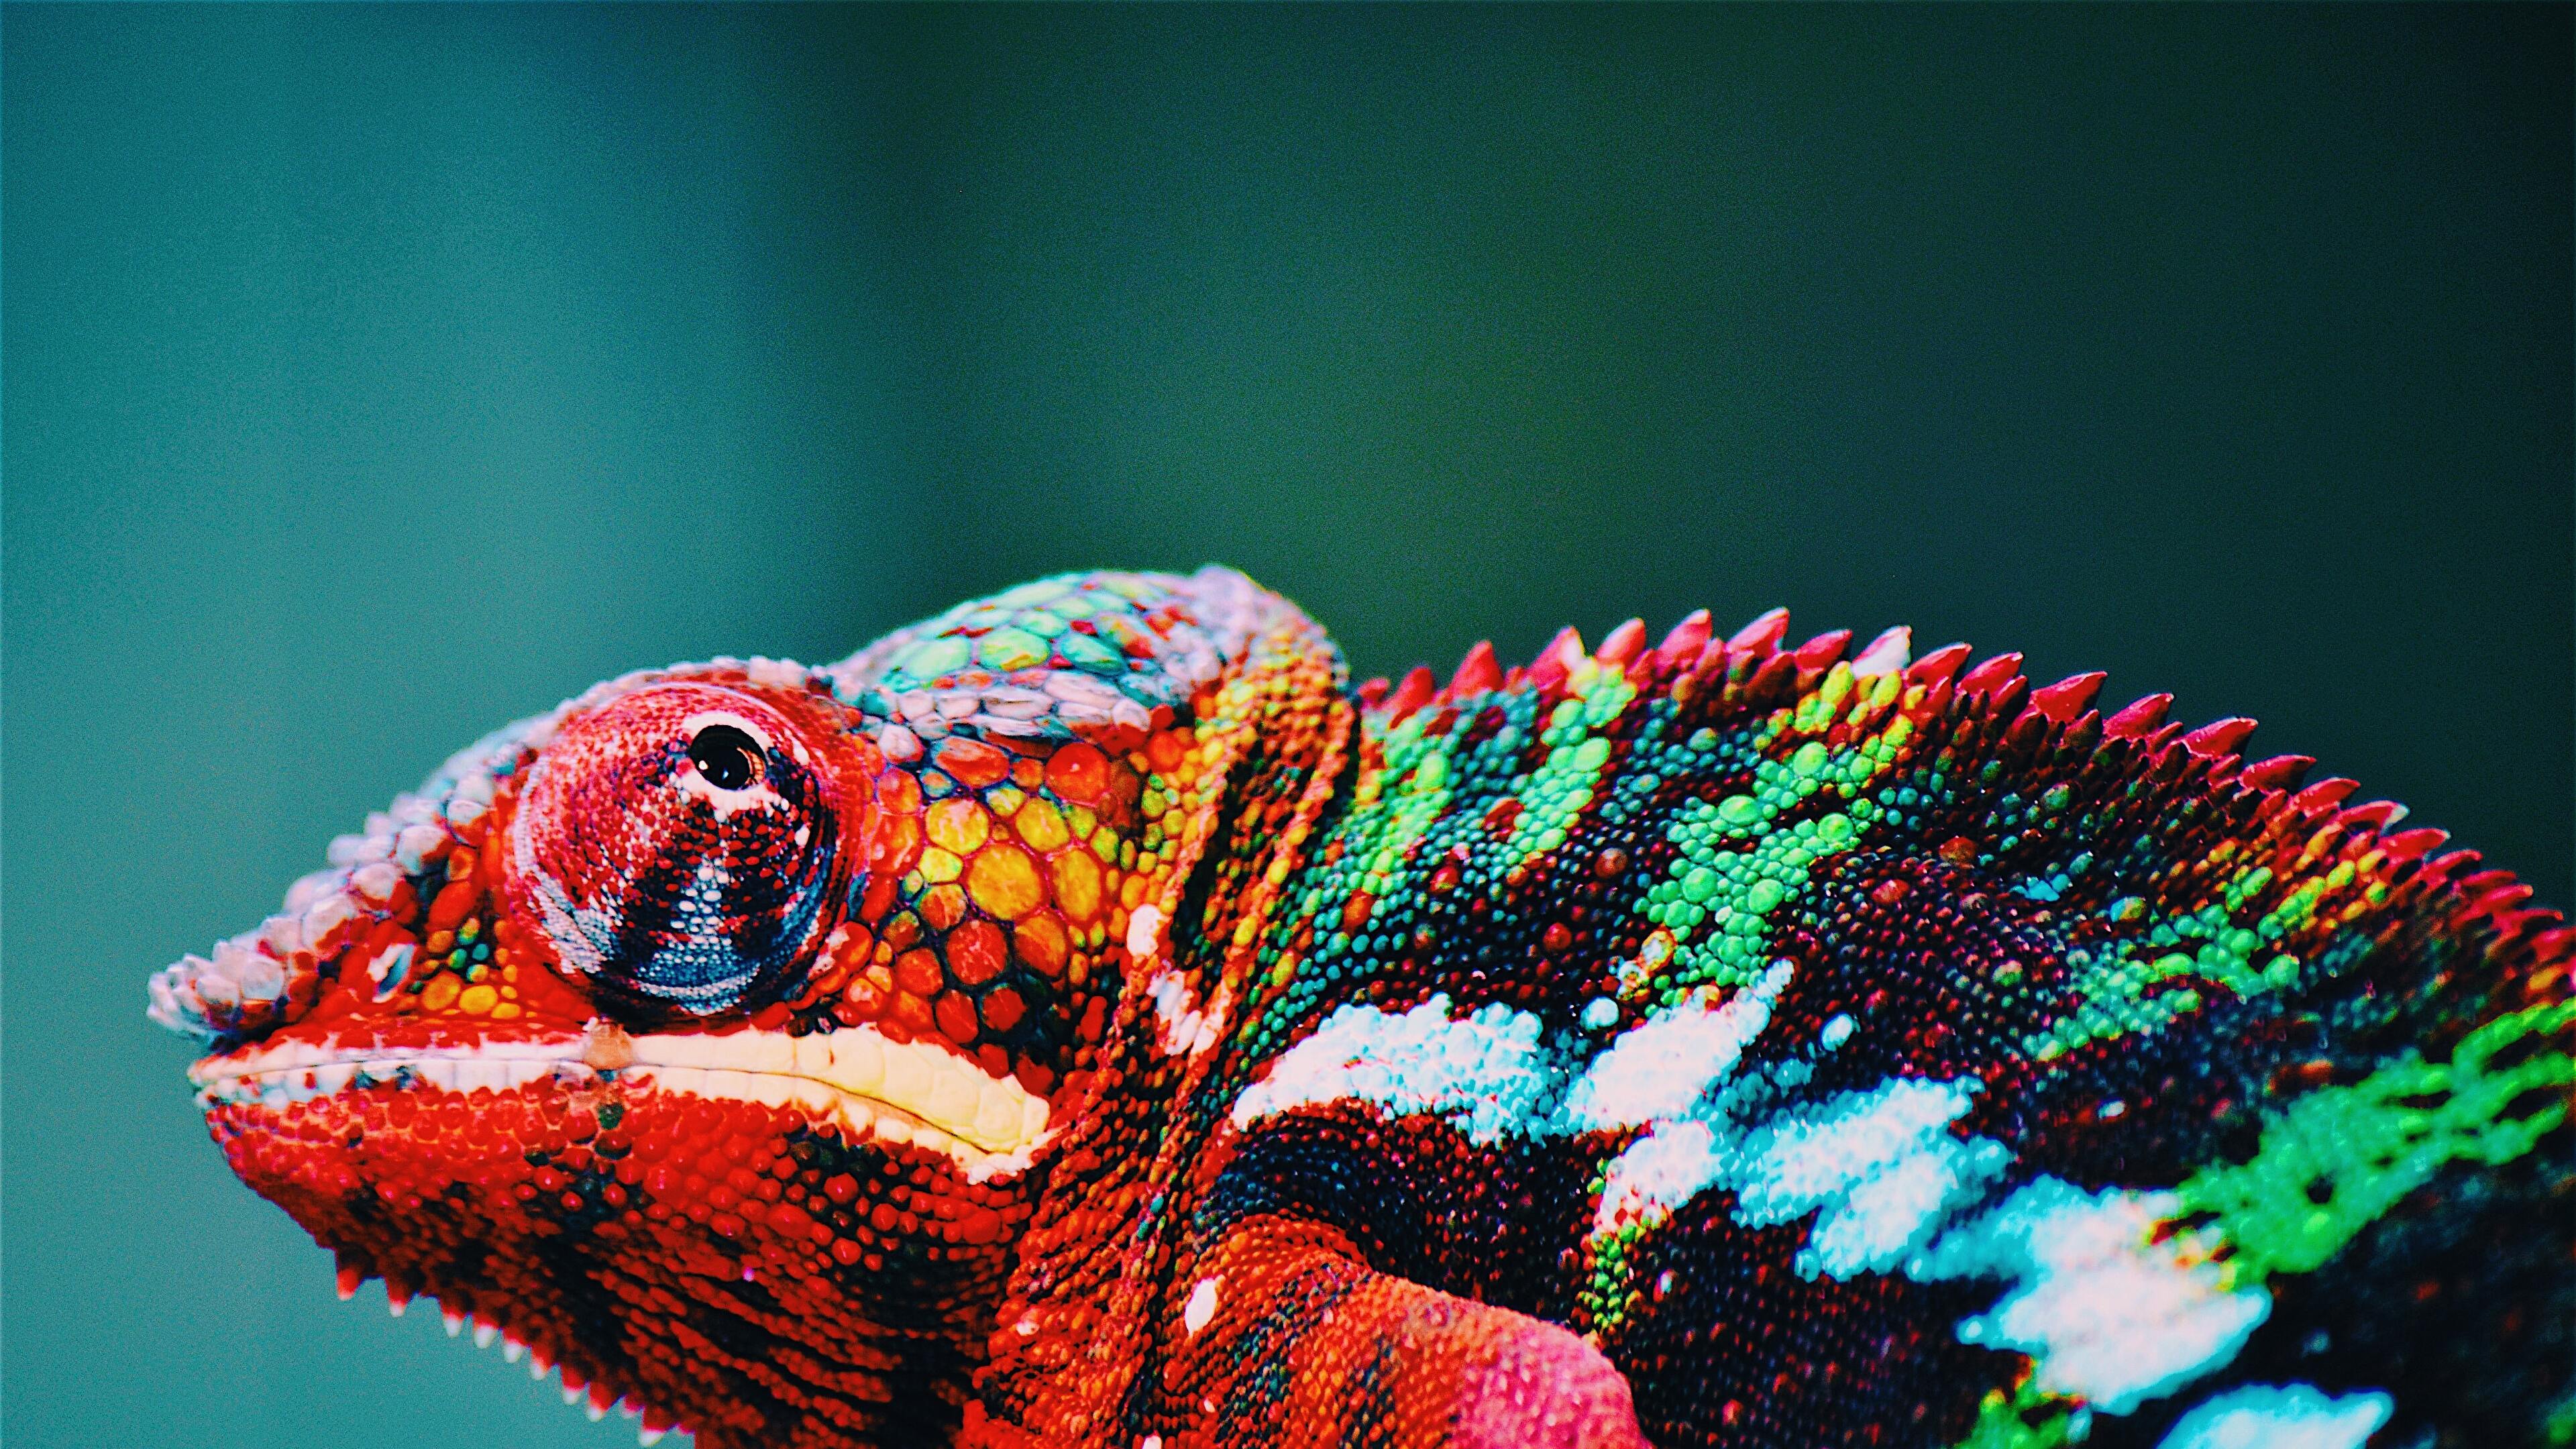 Chameleon 4K wallpapers for your desktop or mobile screen free and easy ...